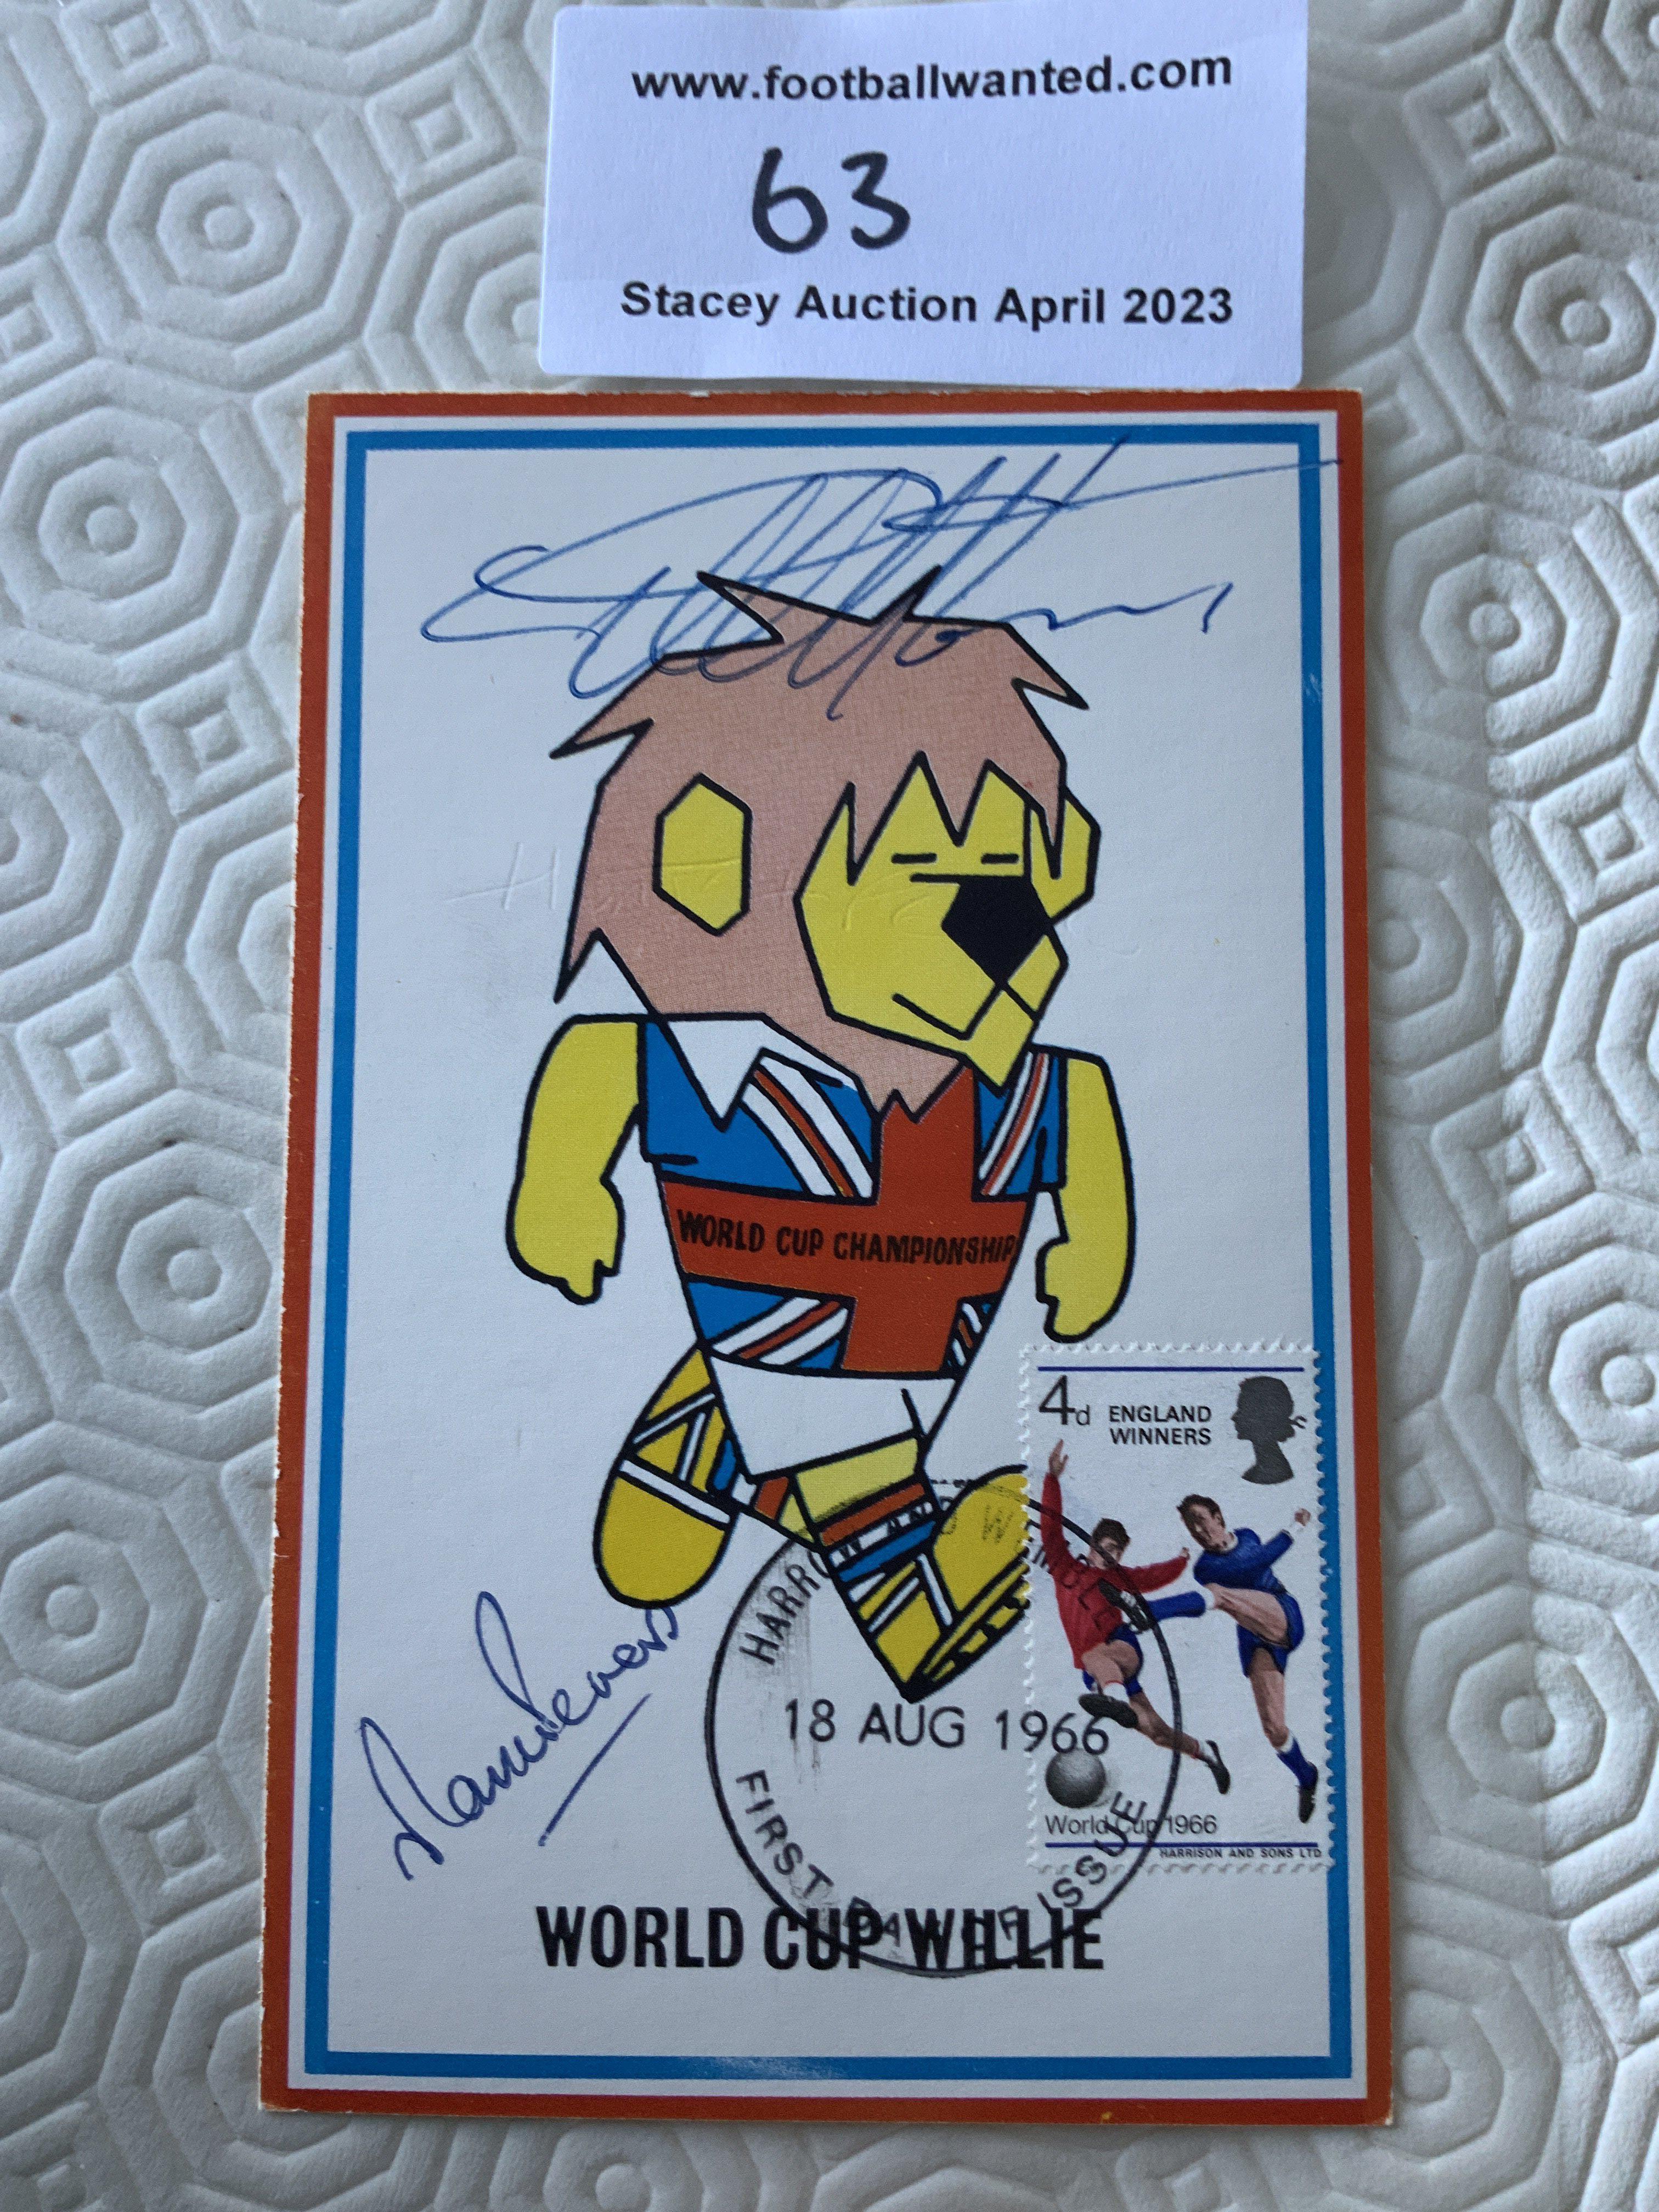 Hurst + Peters Signed 1966 World Cup Willie Postca